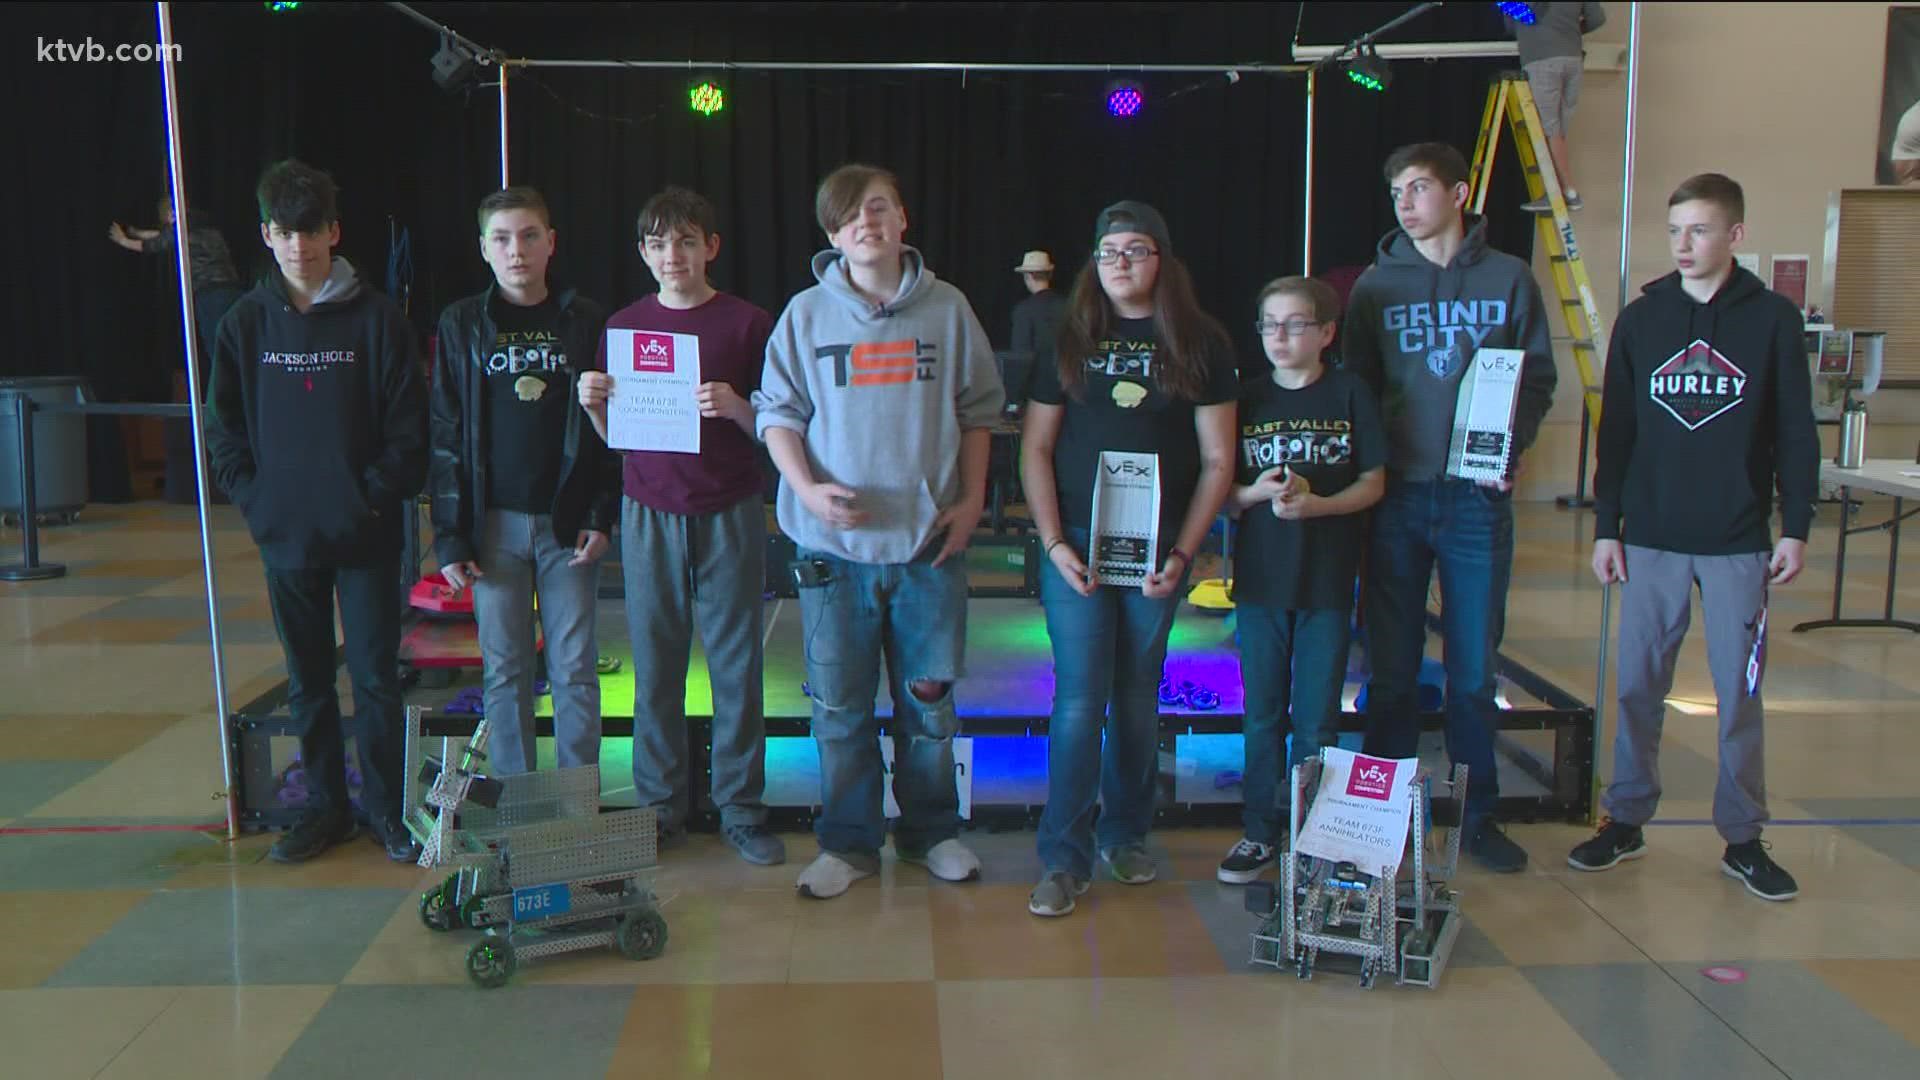 Fifteen middle school robotics teams gathered at East Valley Middle School on Friday to compete in the first middle school-only state robotics championship.